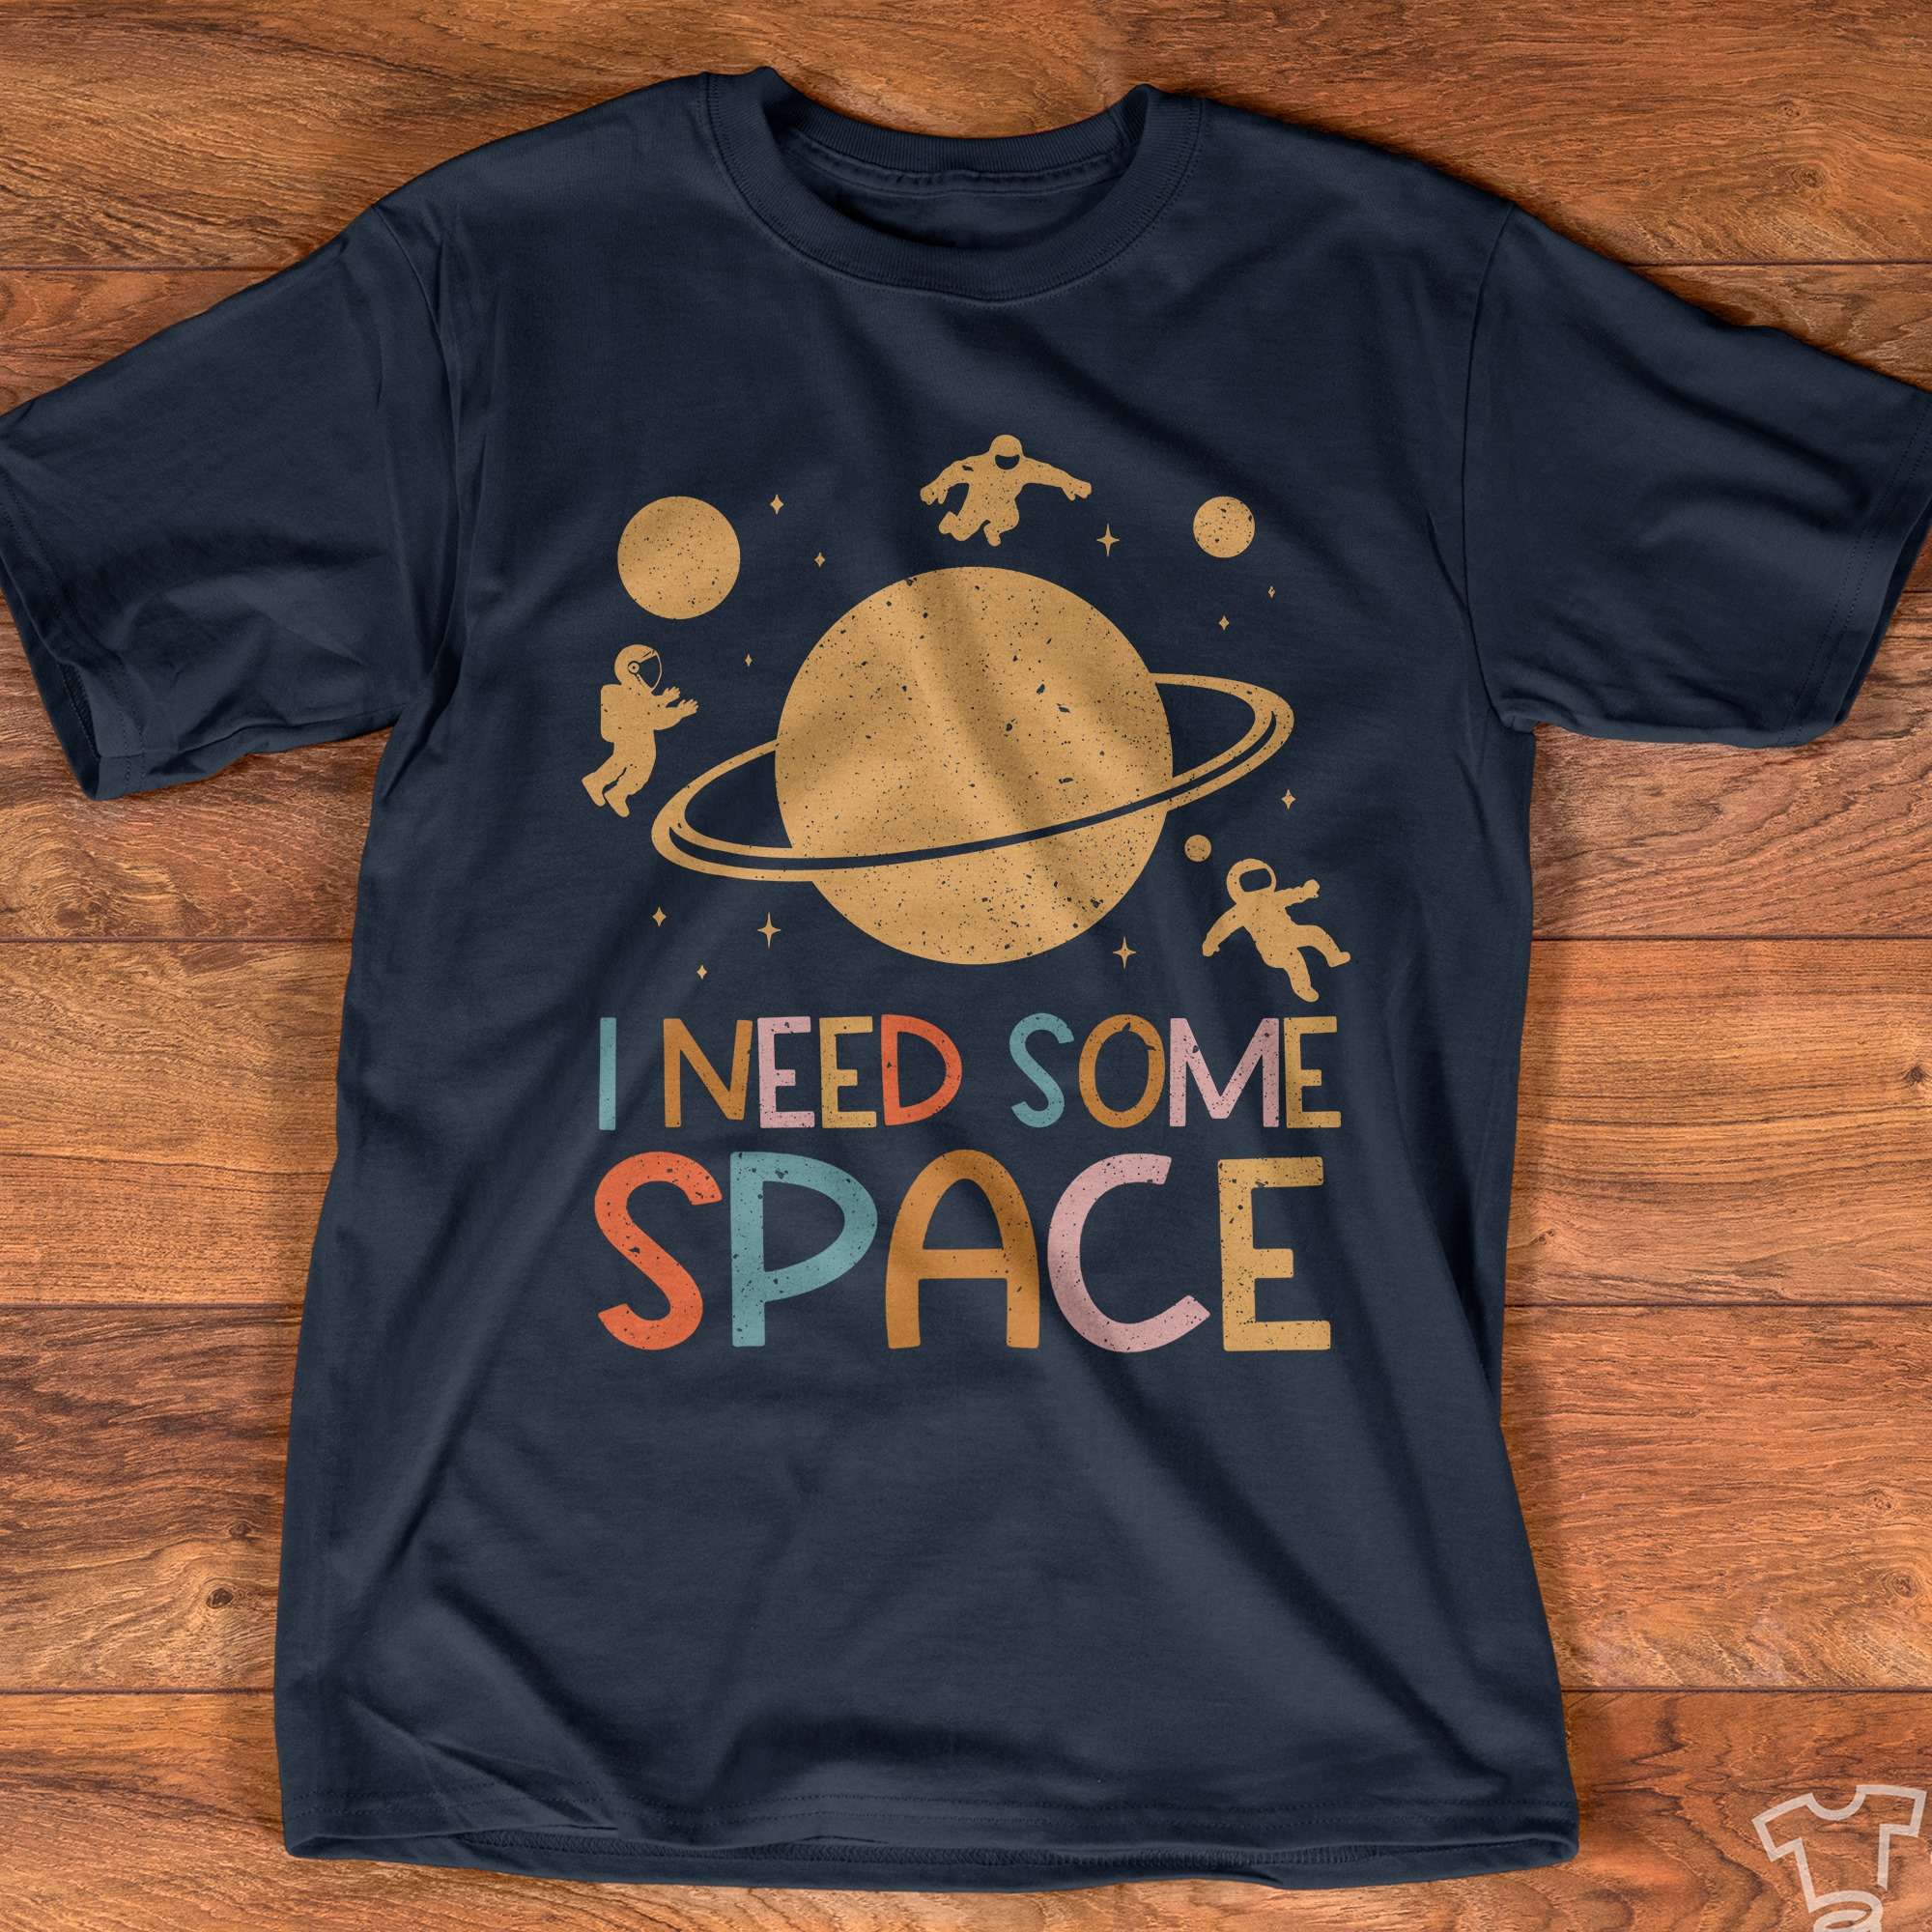 I need some space - Astronaut on the space, outside the planet